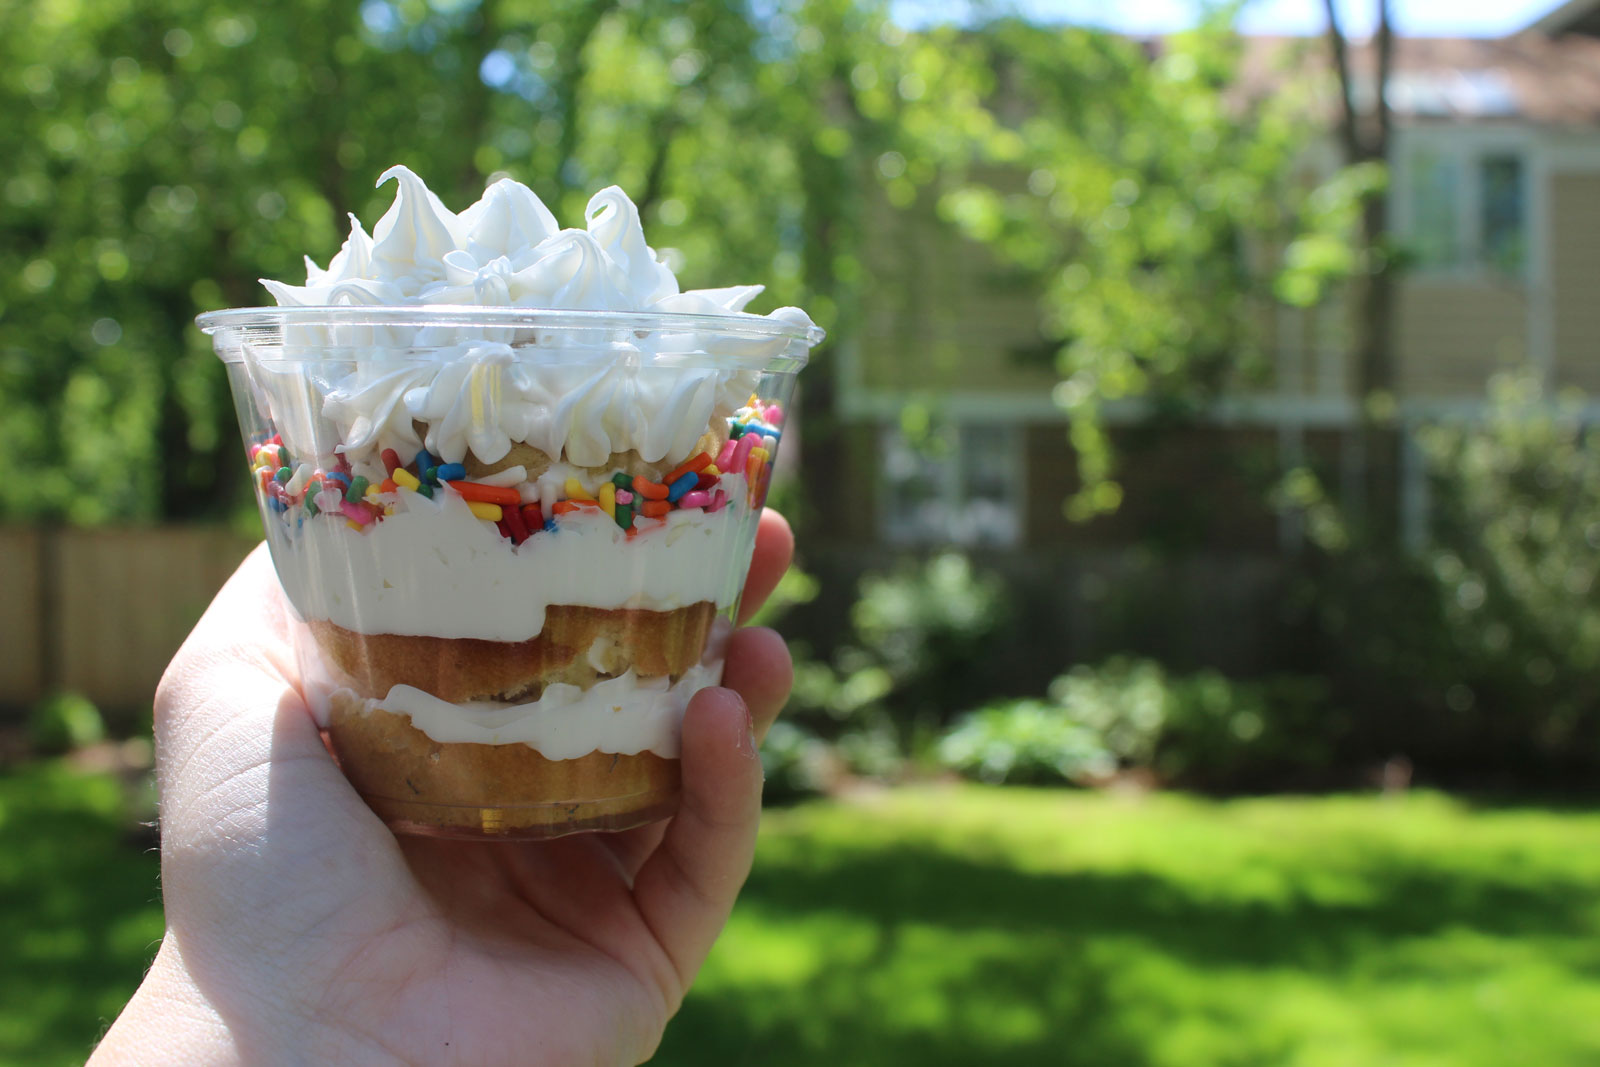 Layered Cupcake in a Cup